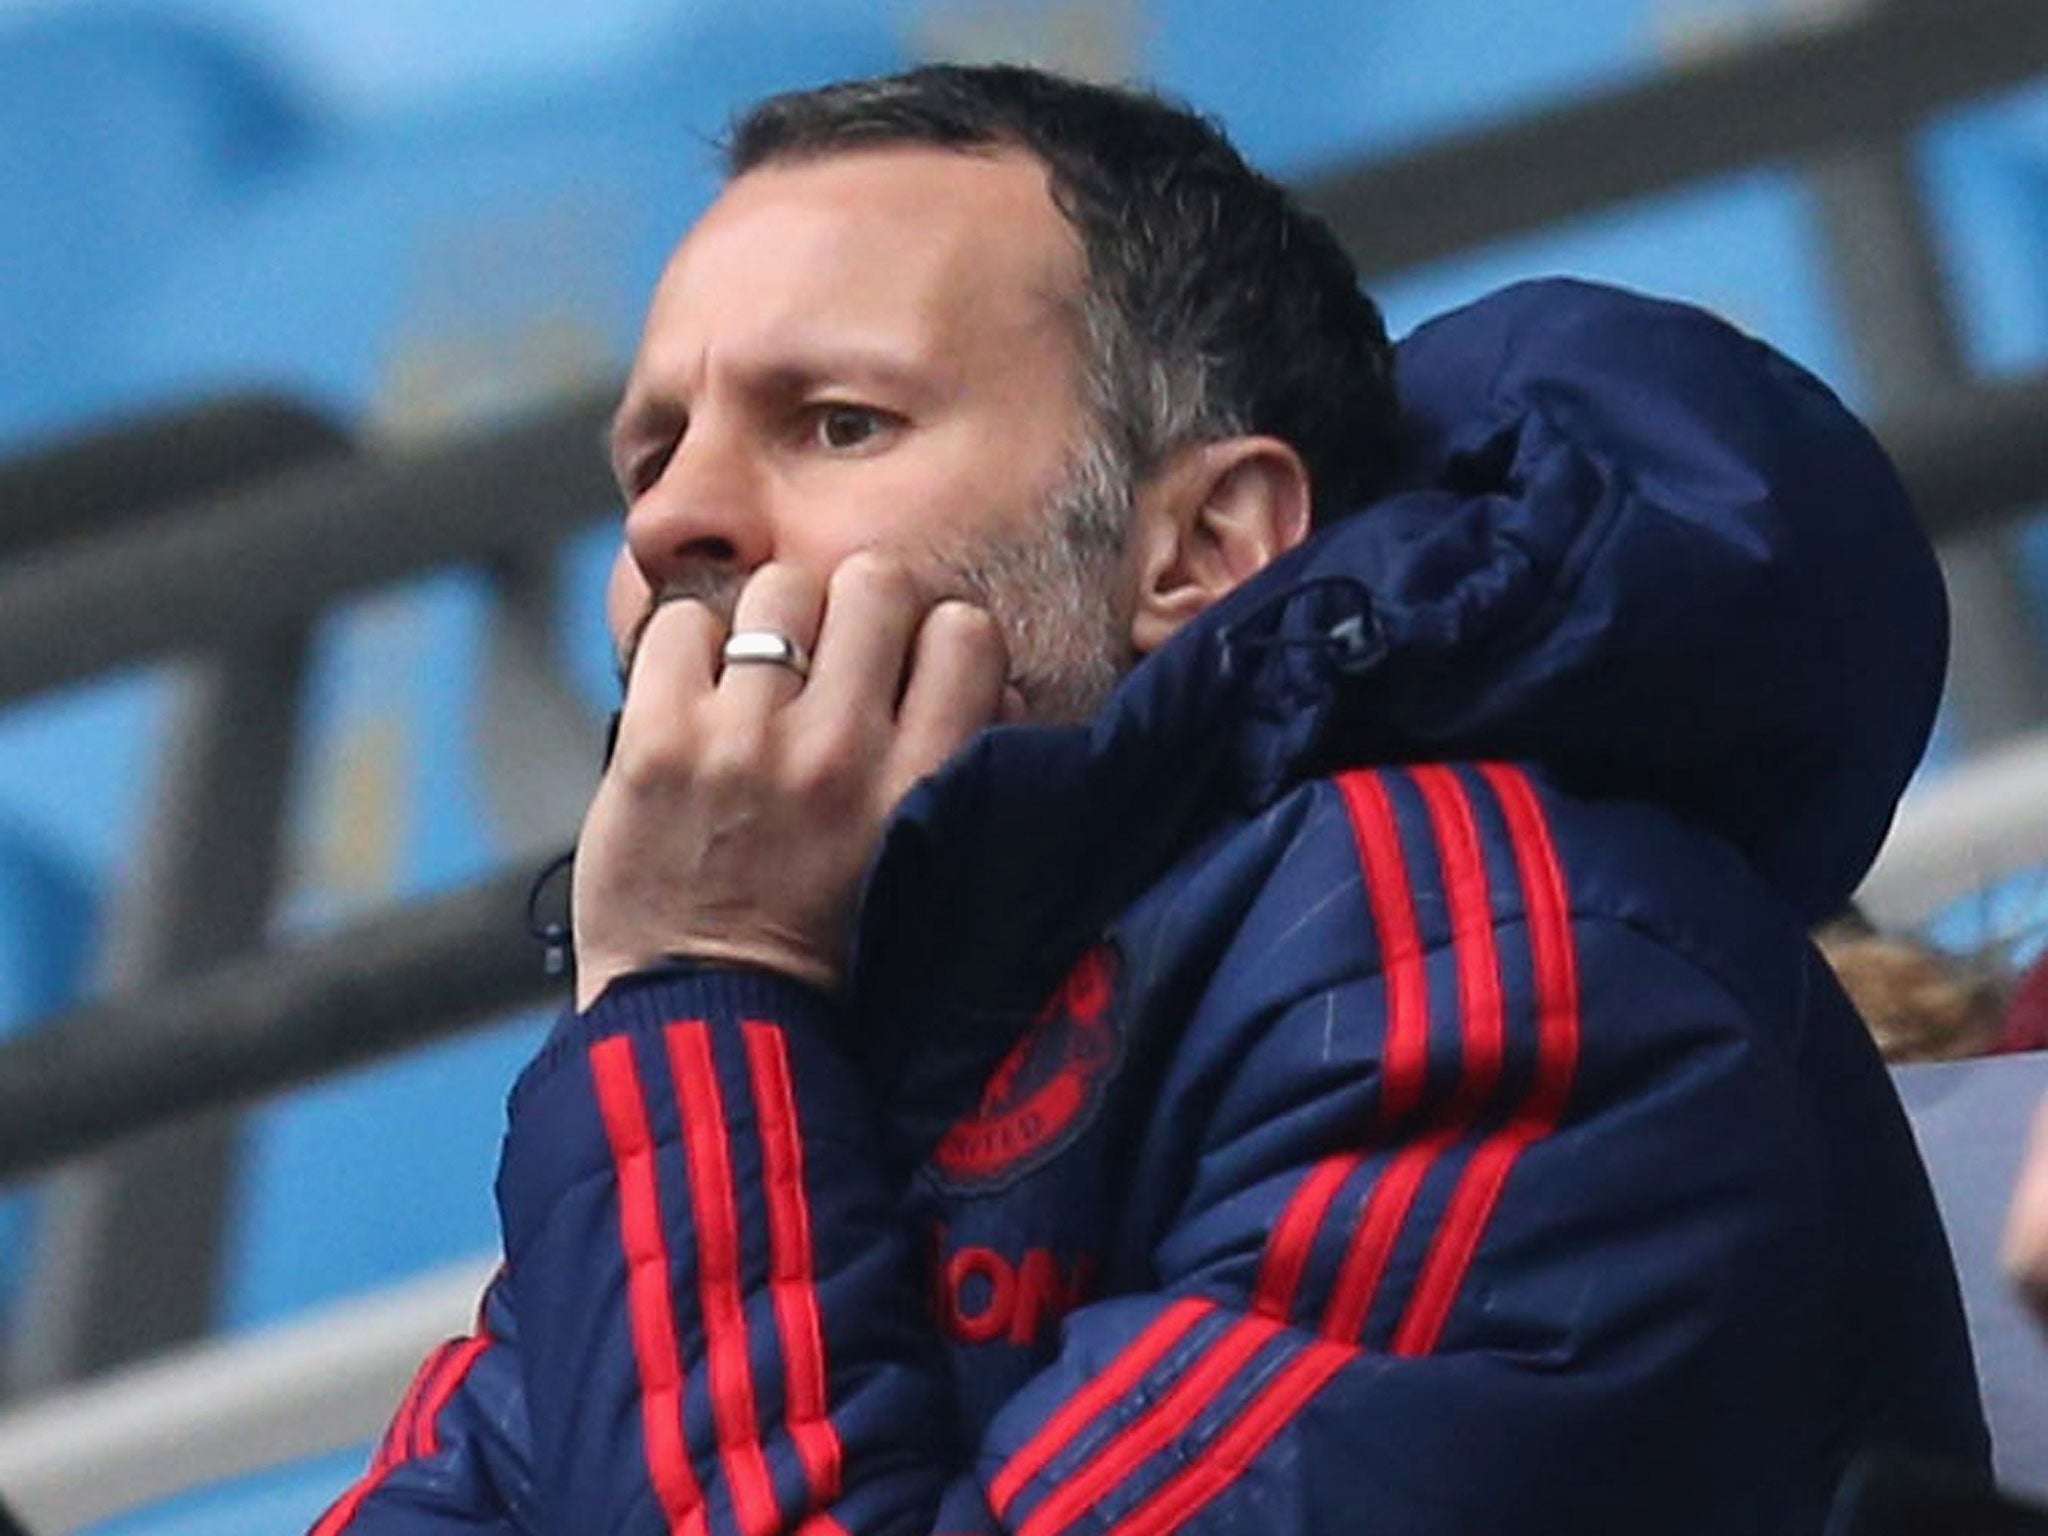 Ryan Giggs looks on from the stands